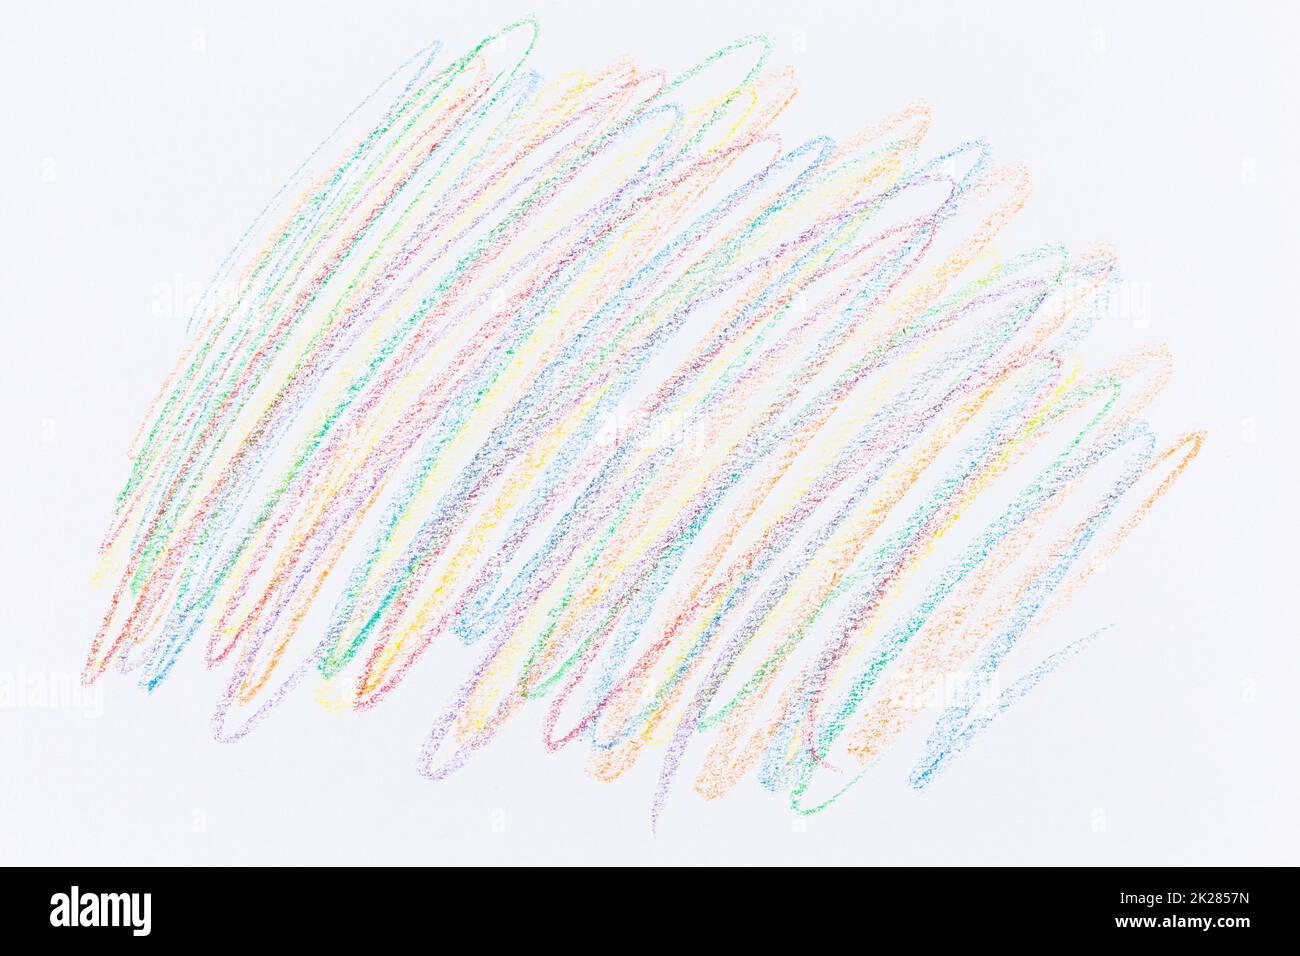 Multi color hand crayon drawing Stock Photo